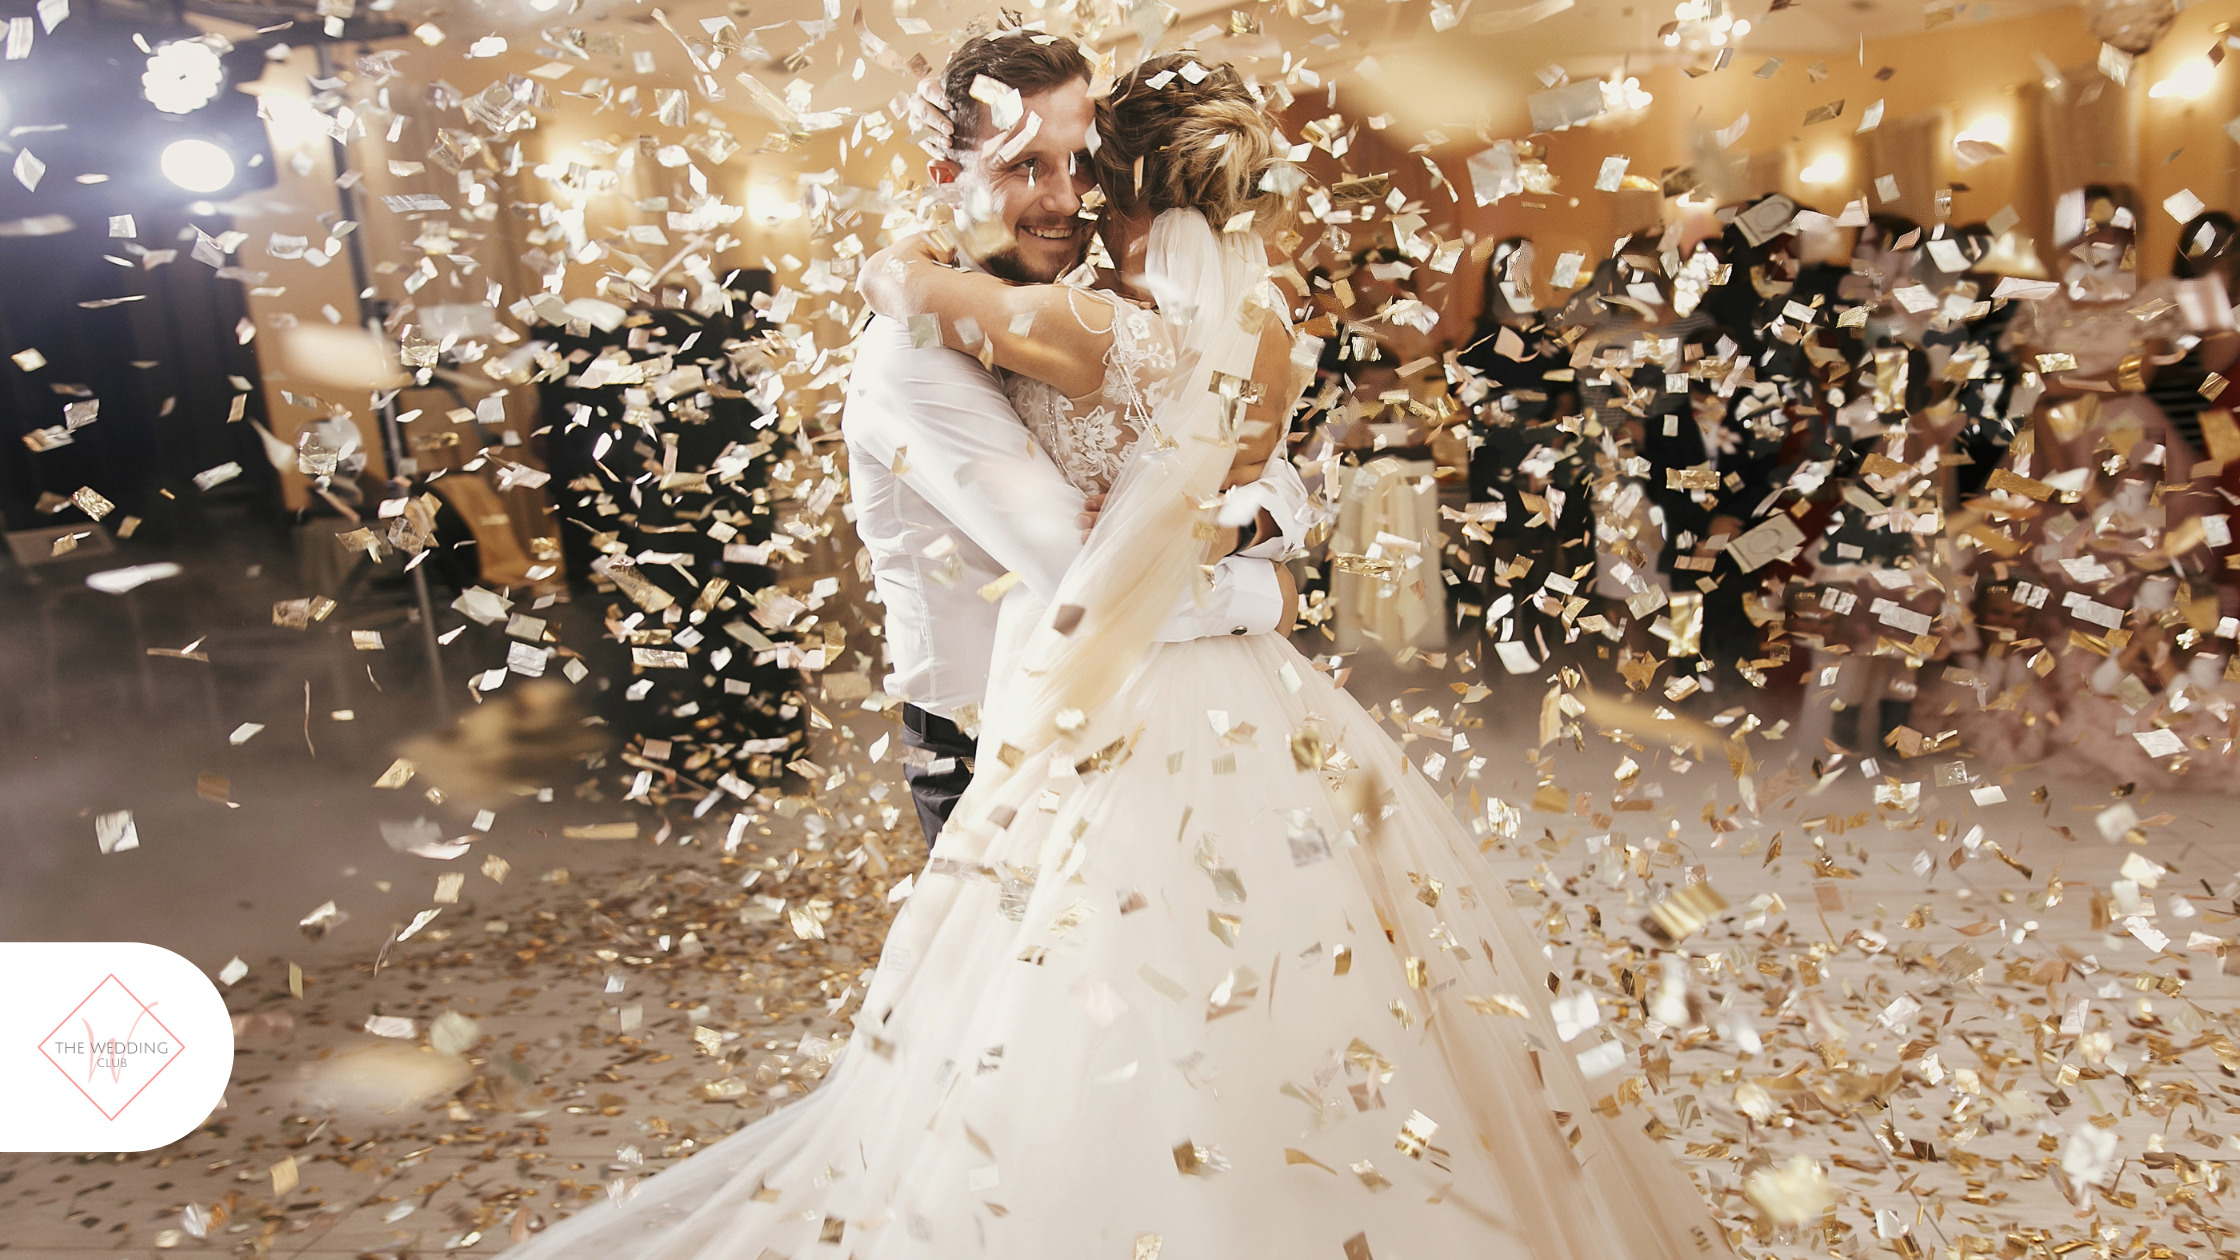 6 Secrets to a successful wedding day